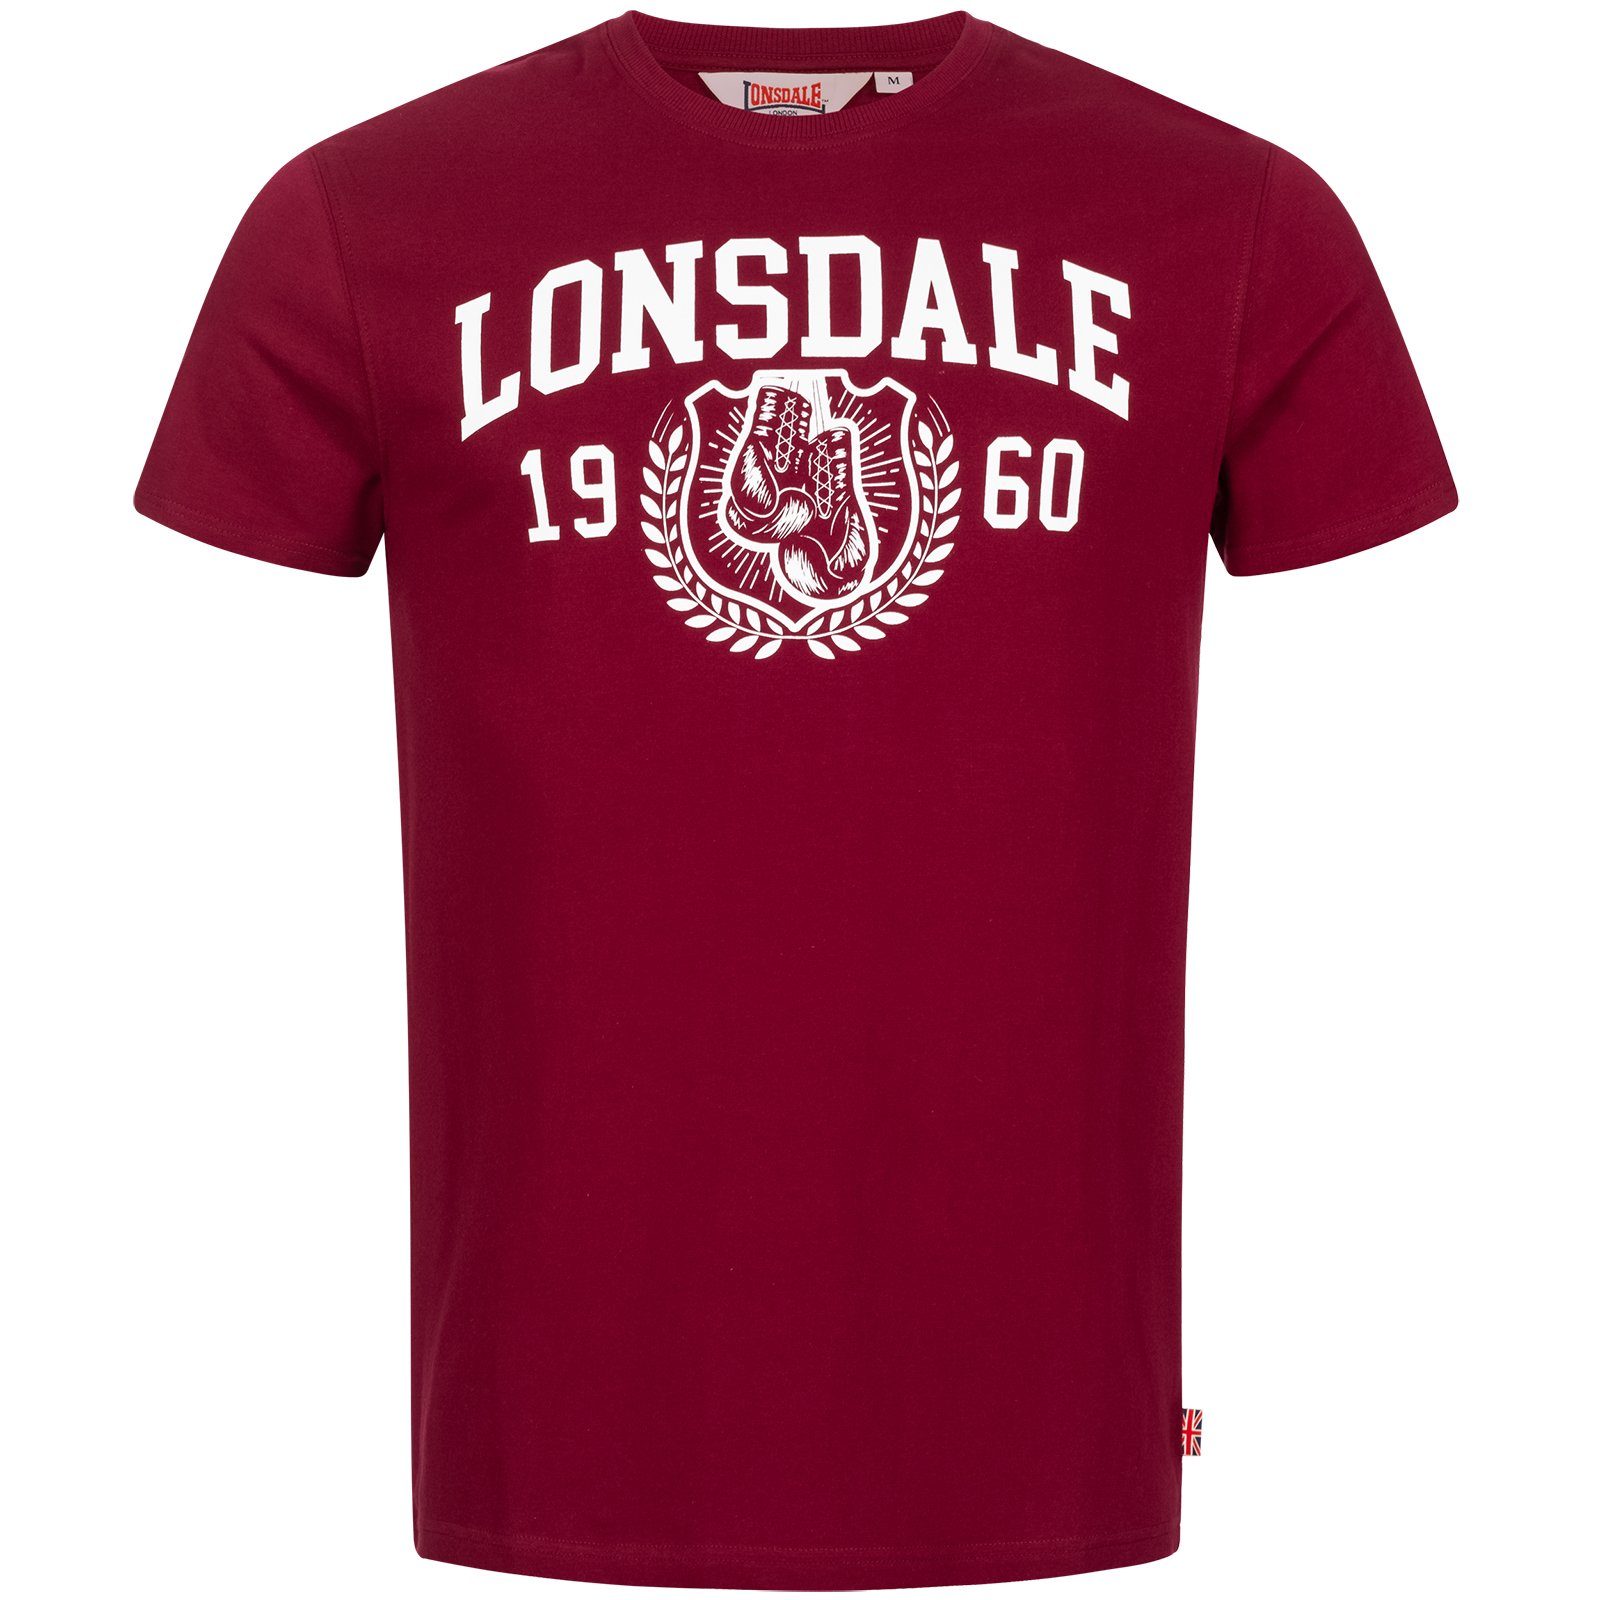 Lonsdale T-Shirt T-Shirt Lonsdale (1 Staxigoe Stück, 1-tlg) rot